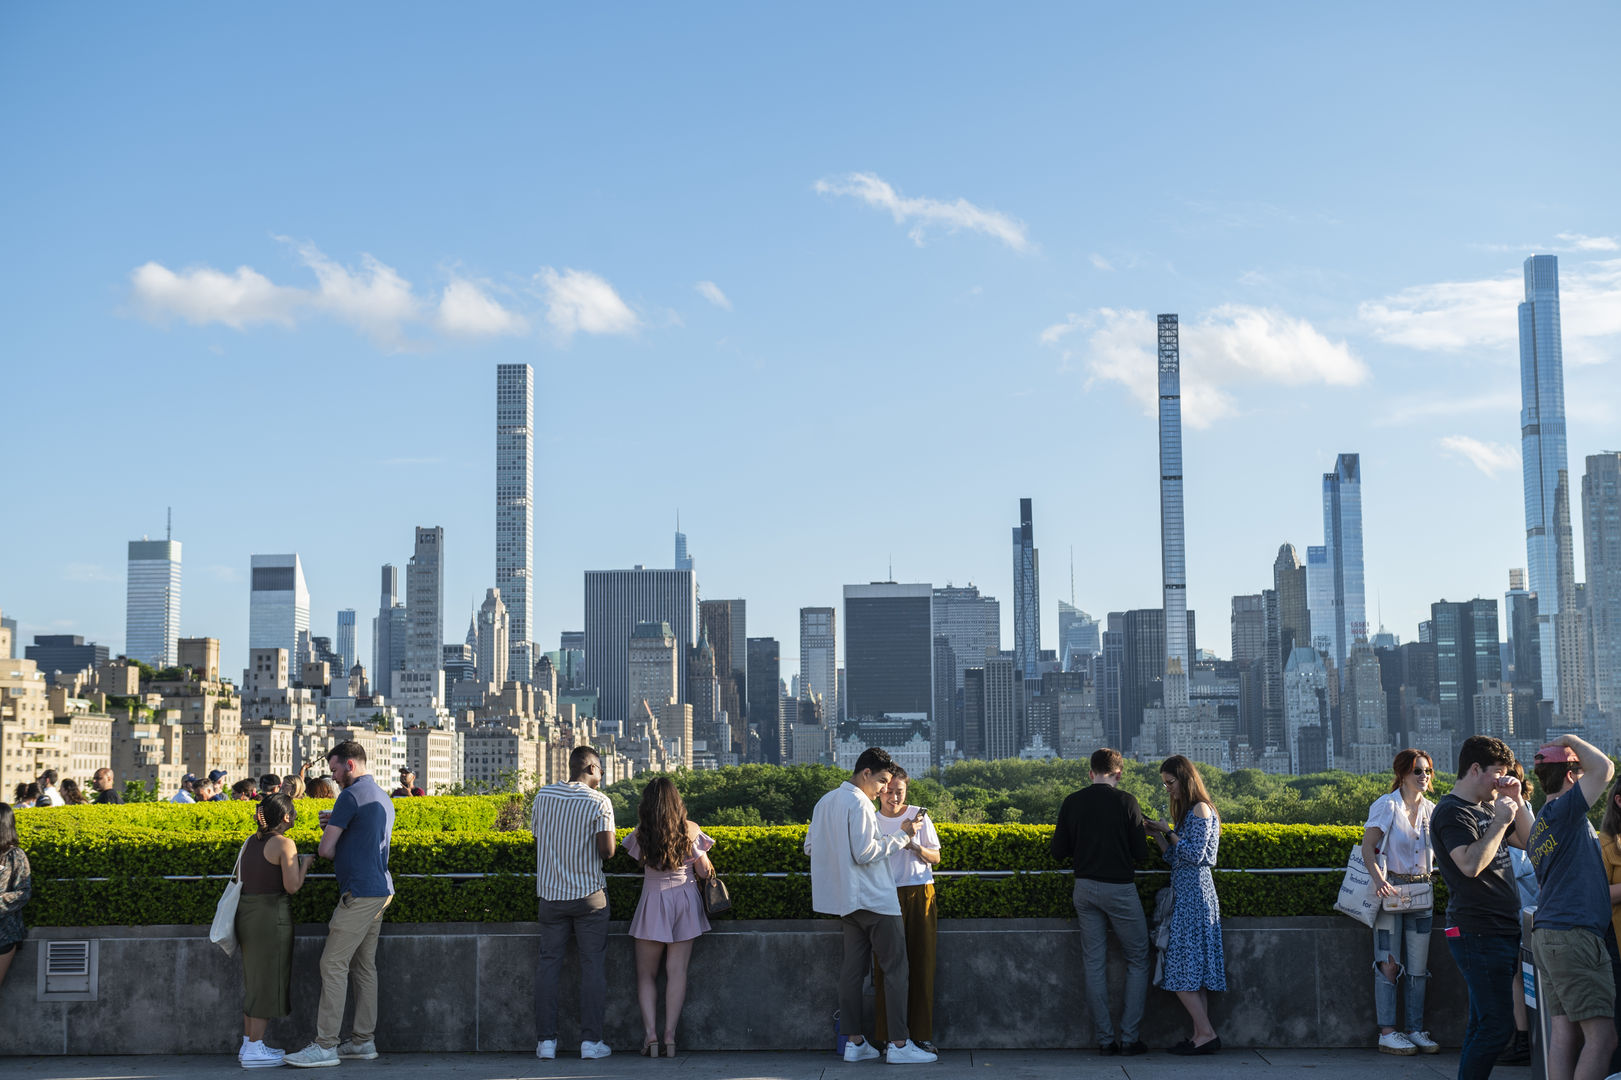 Visitors on the roof of the Metropolitan Museum of Art viewing the New York City skylines